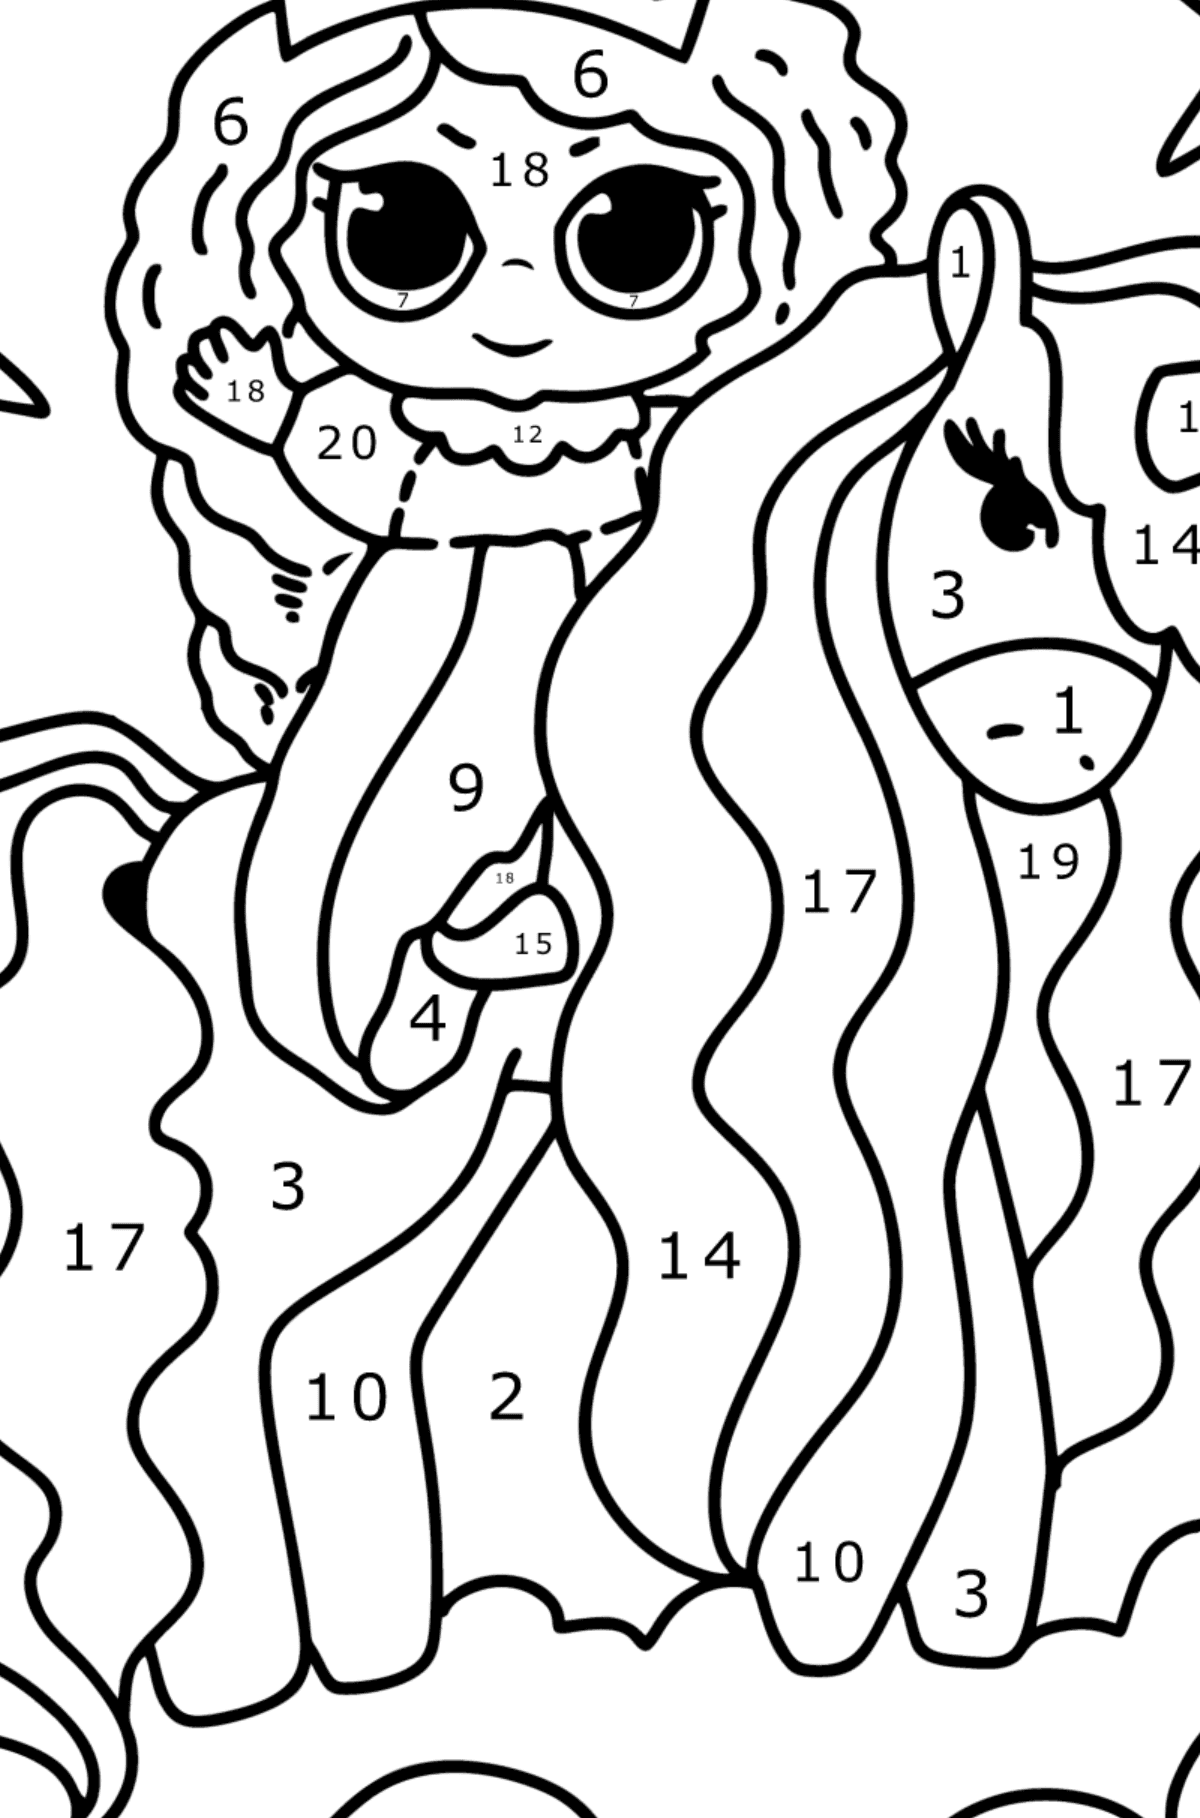 Princess and unicorn coloring page - Coloring by Numbers for Kids